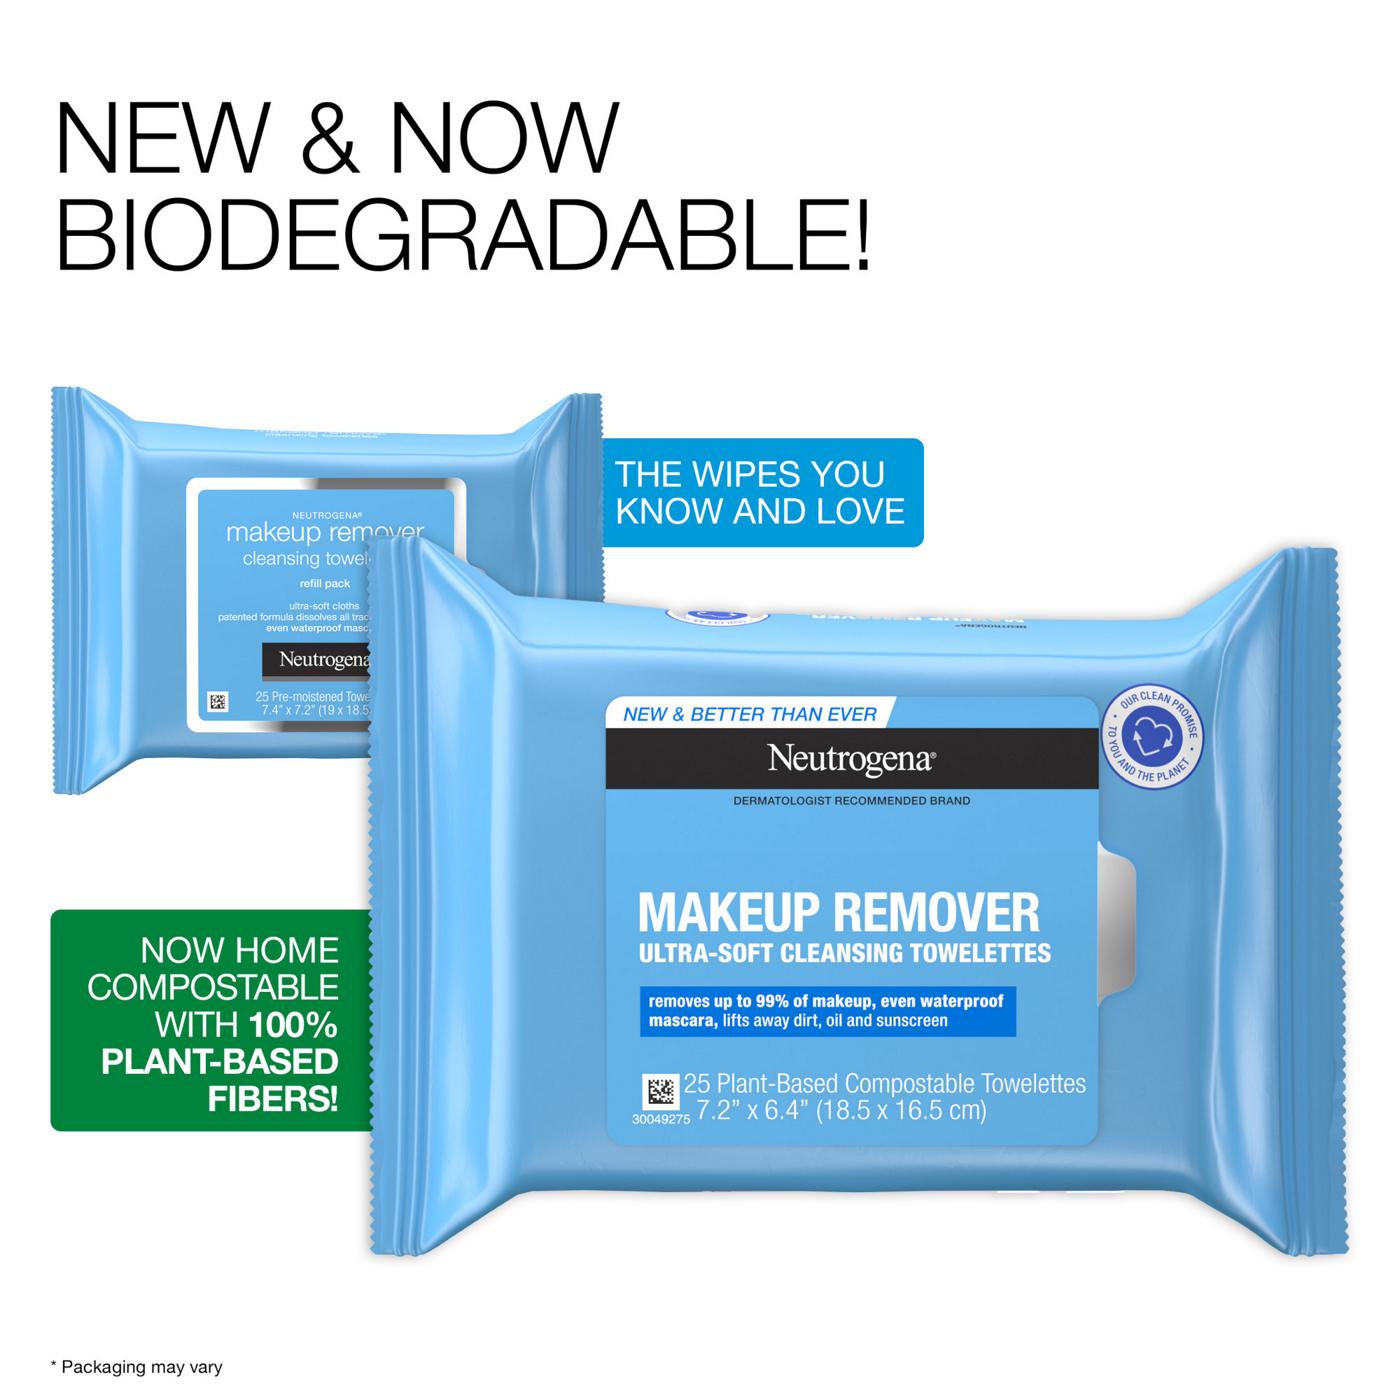 Neutrogena Makeup Remover Cleansing Towelettes; image 6 of 8